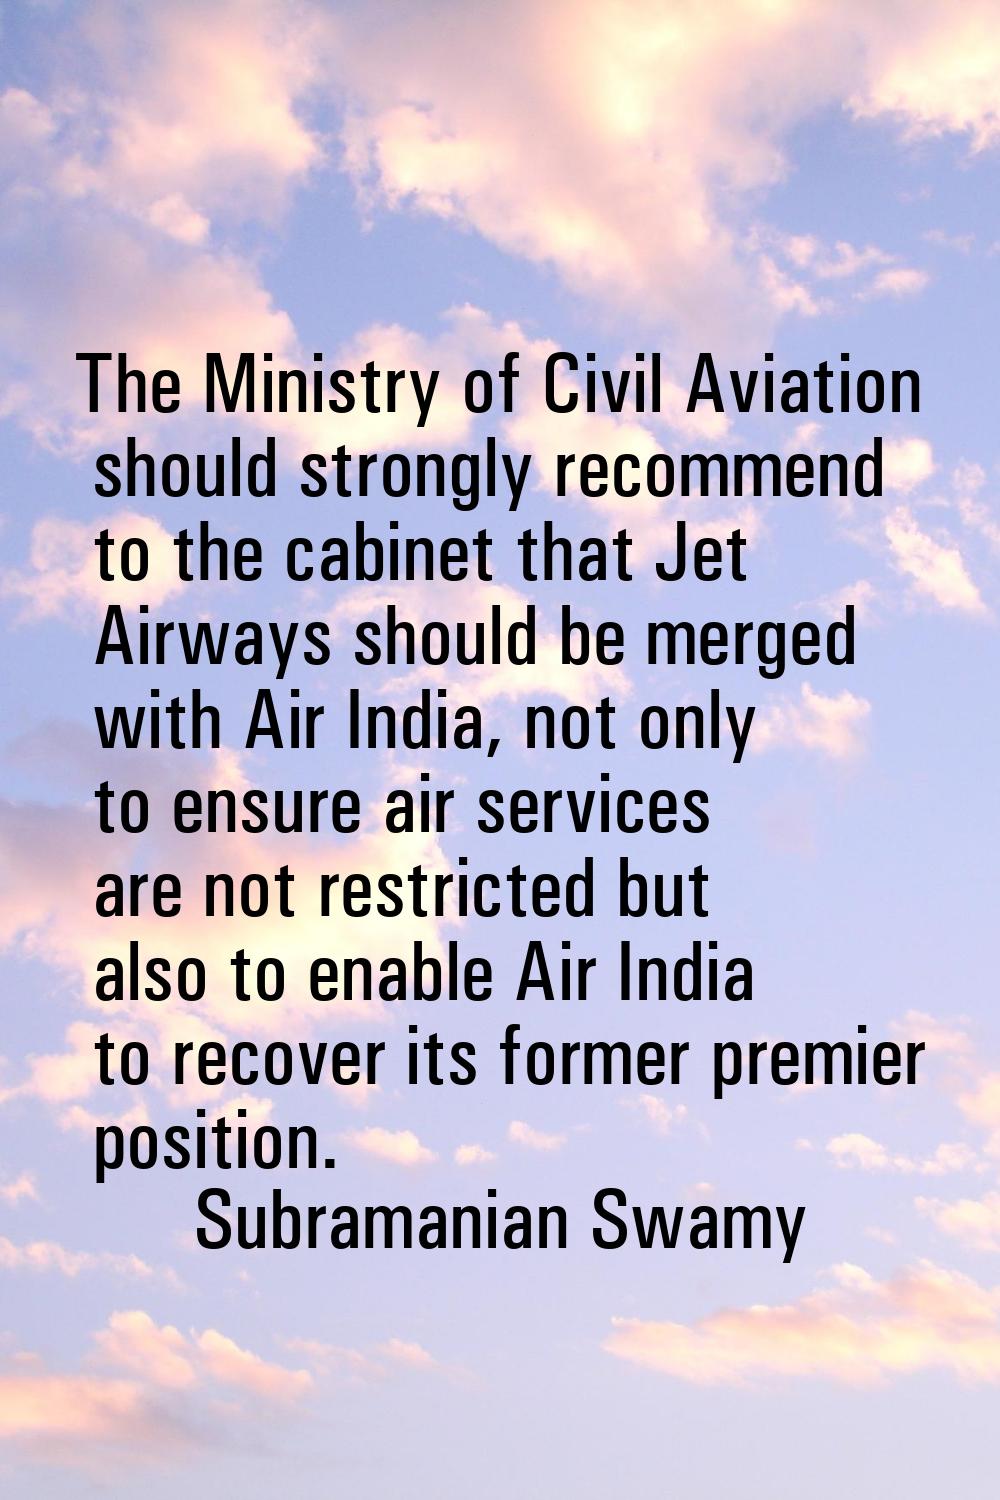 The Ministry of Civil Aviation should strongly recommend to the cabinet that Jet Airways should be 